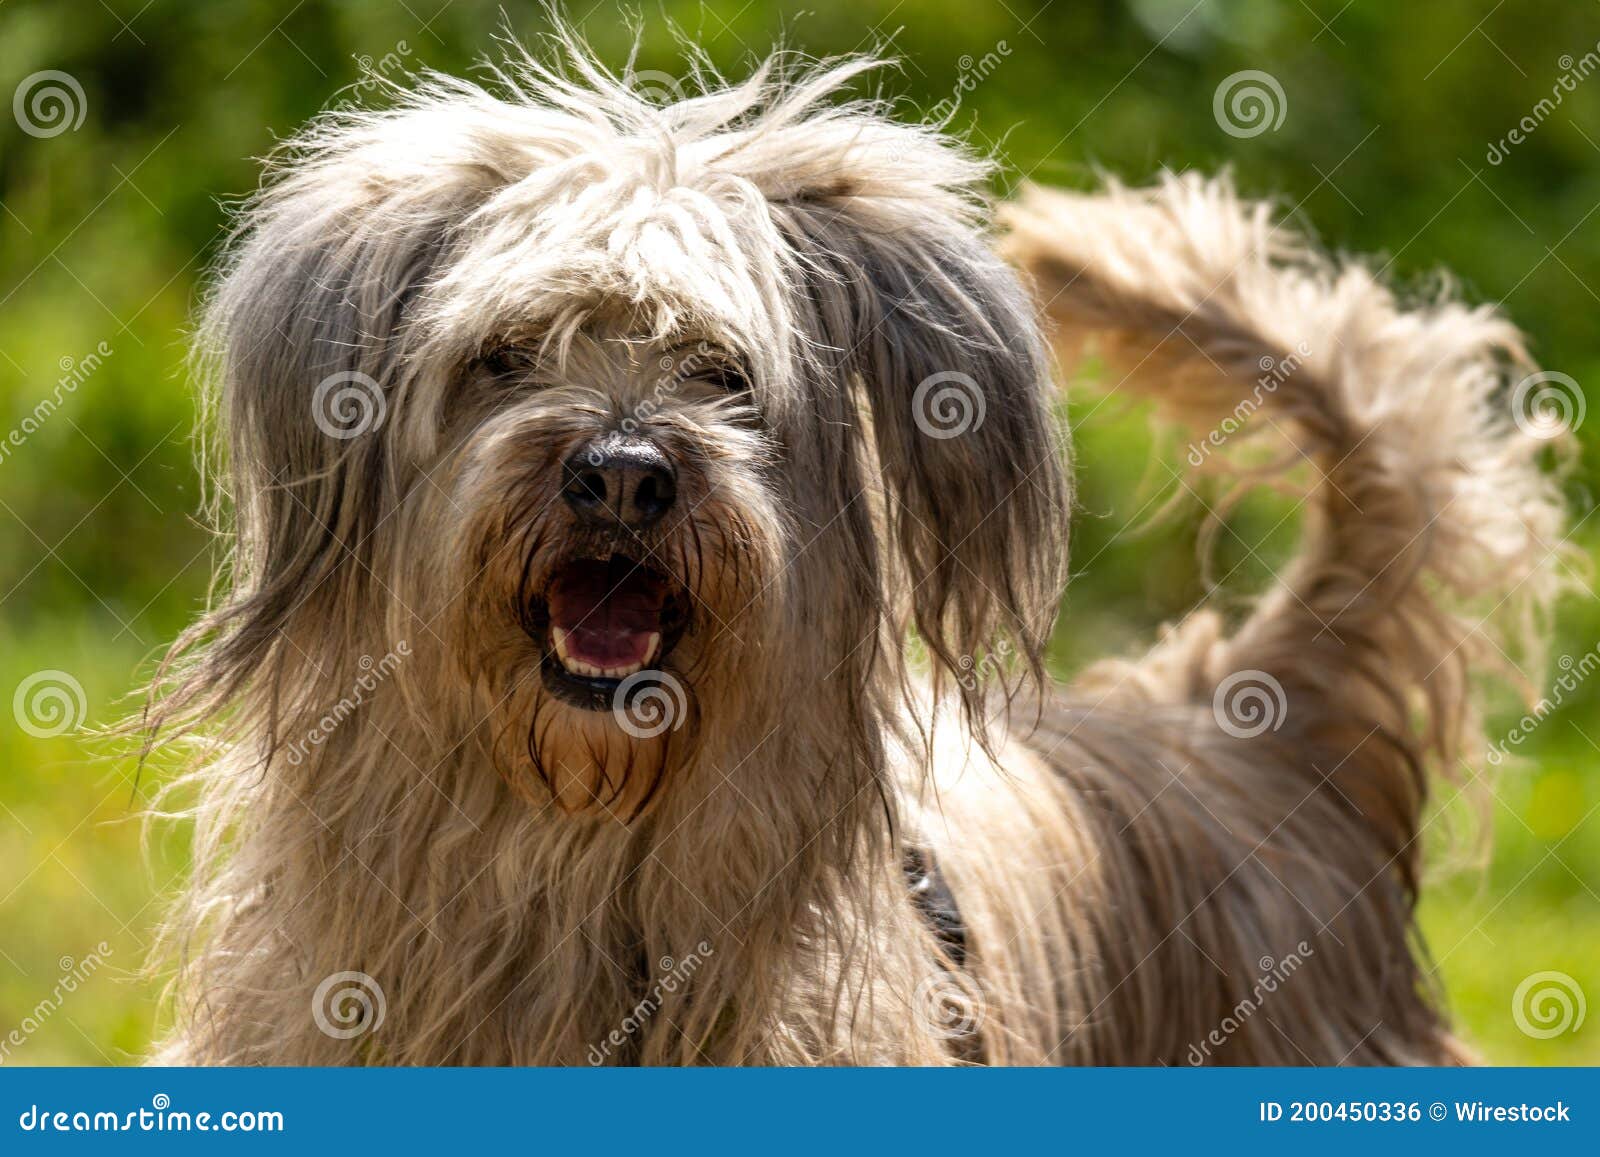 closeup of a cheerful portuguese sheepdog in a field under the sunlight with a blurry background